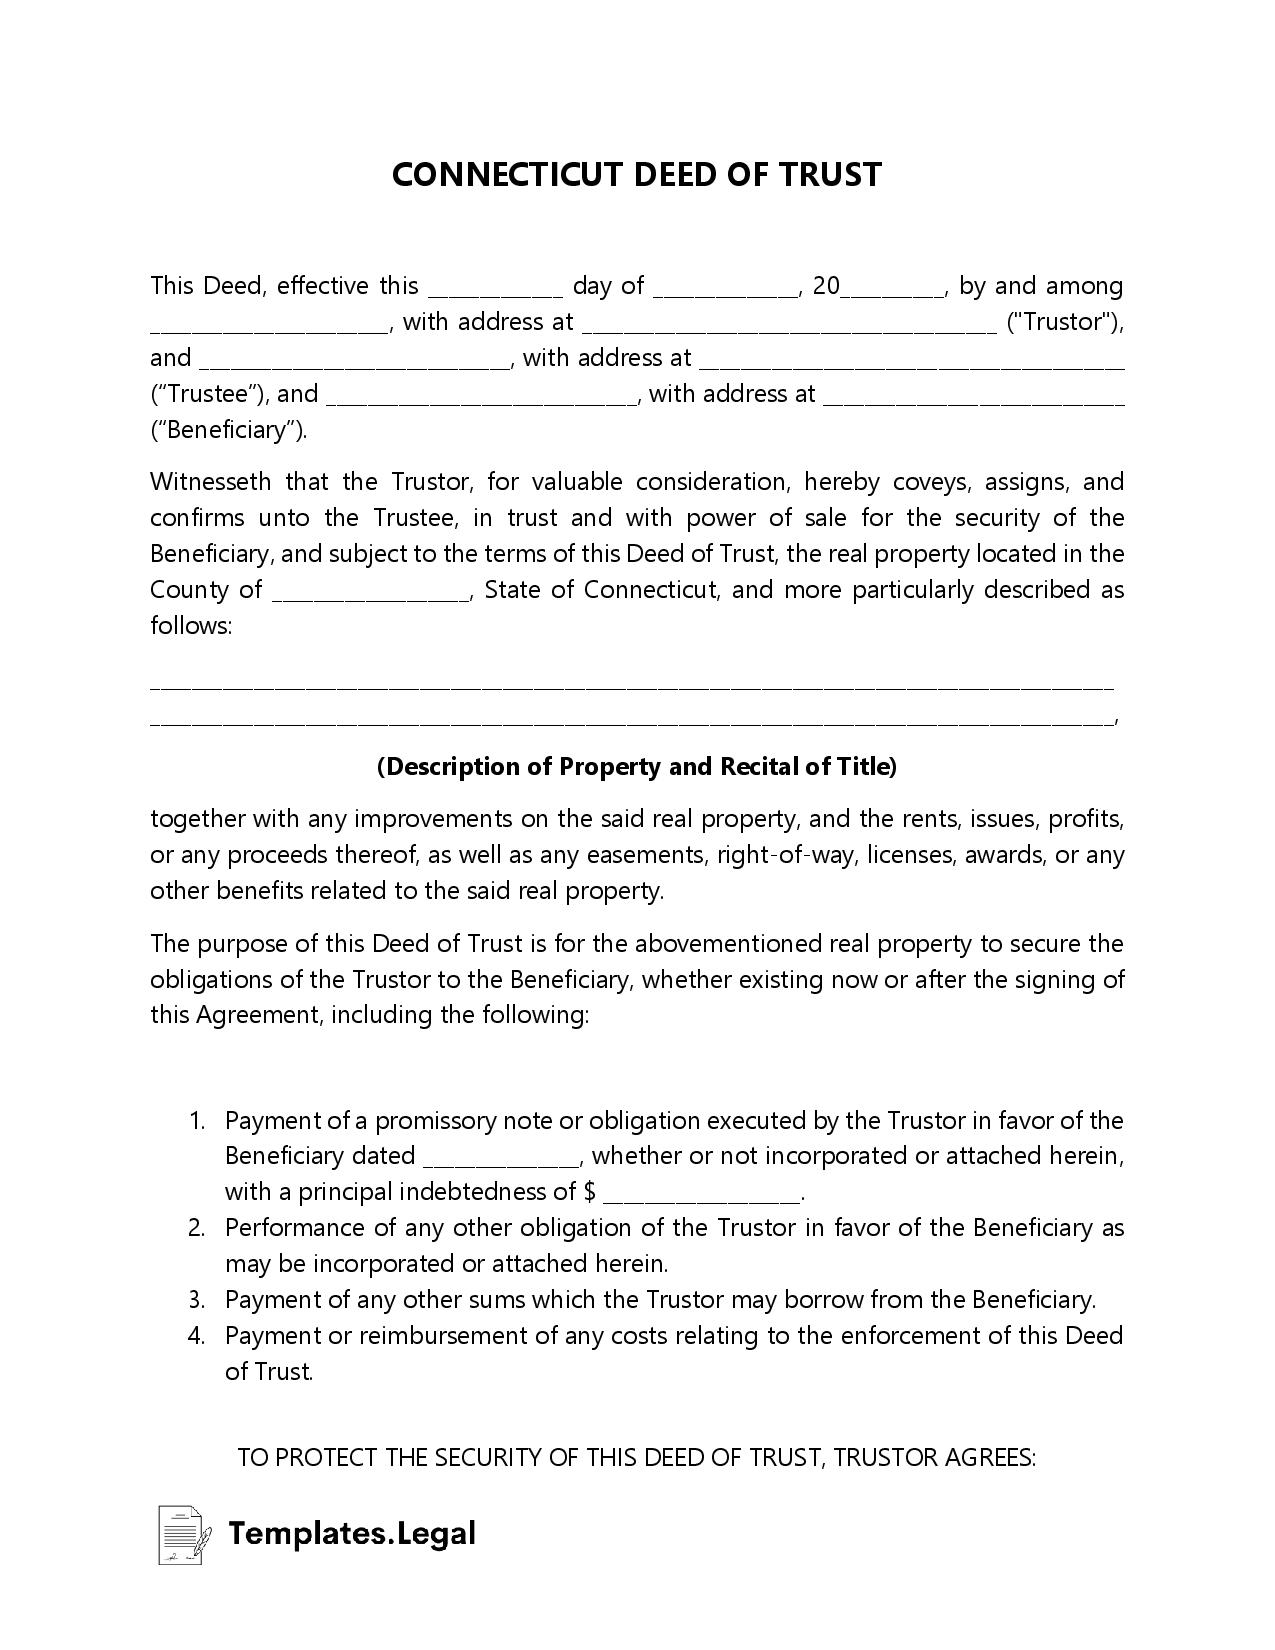 Connecticut Deed of Trust - Templates.Legal